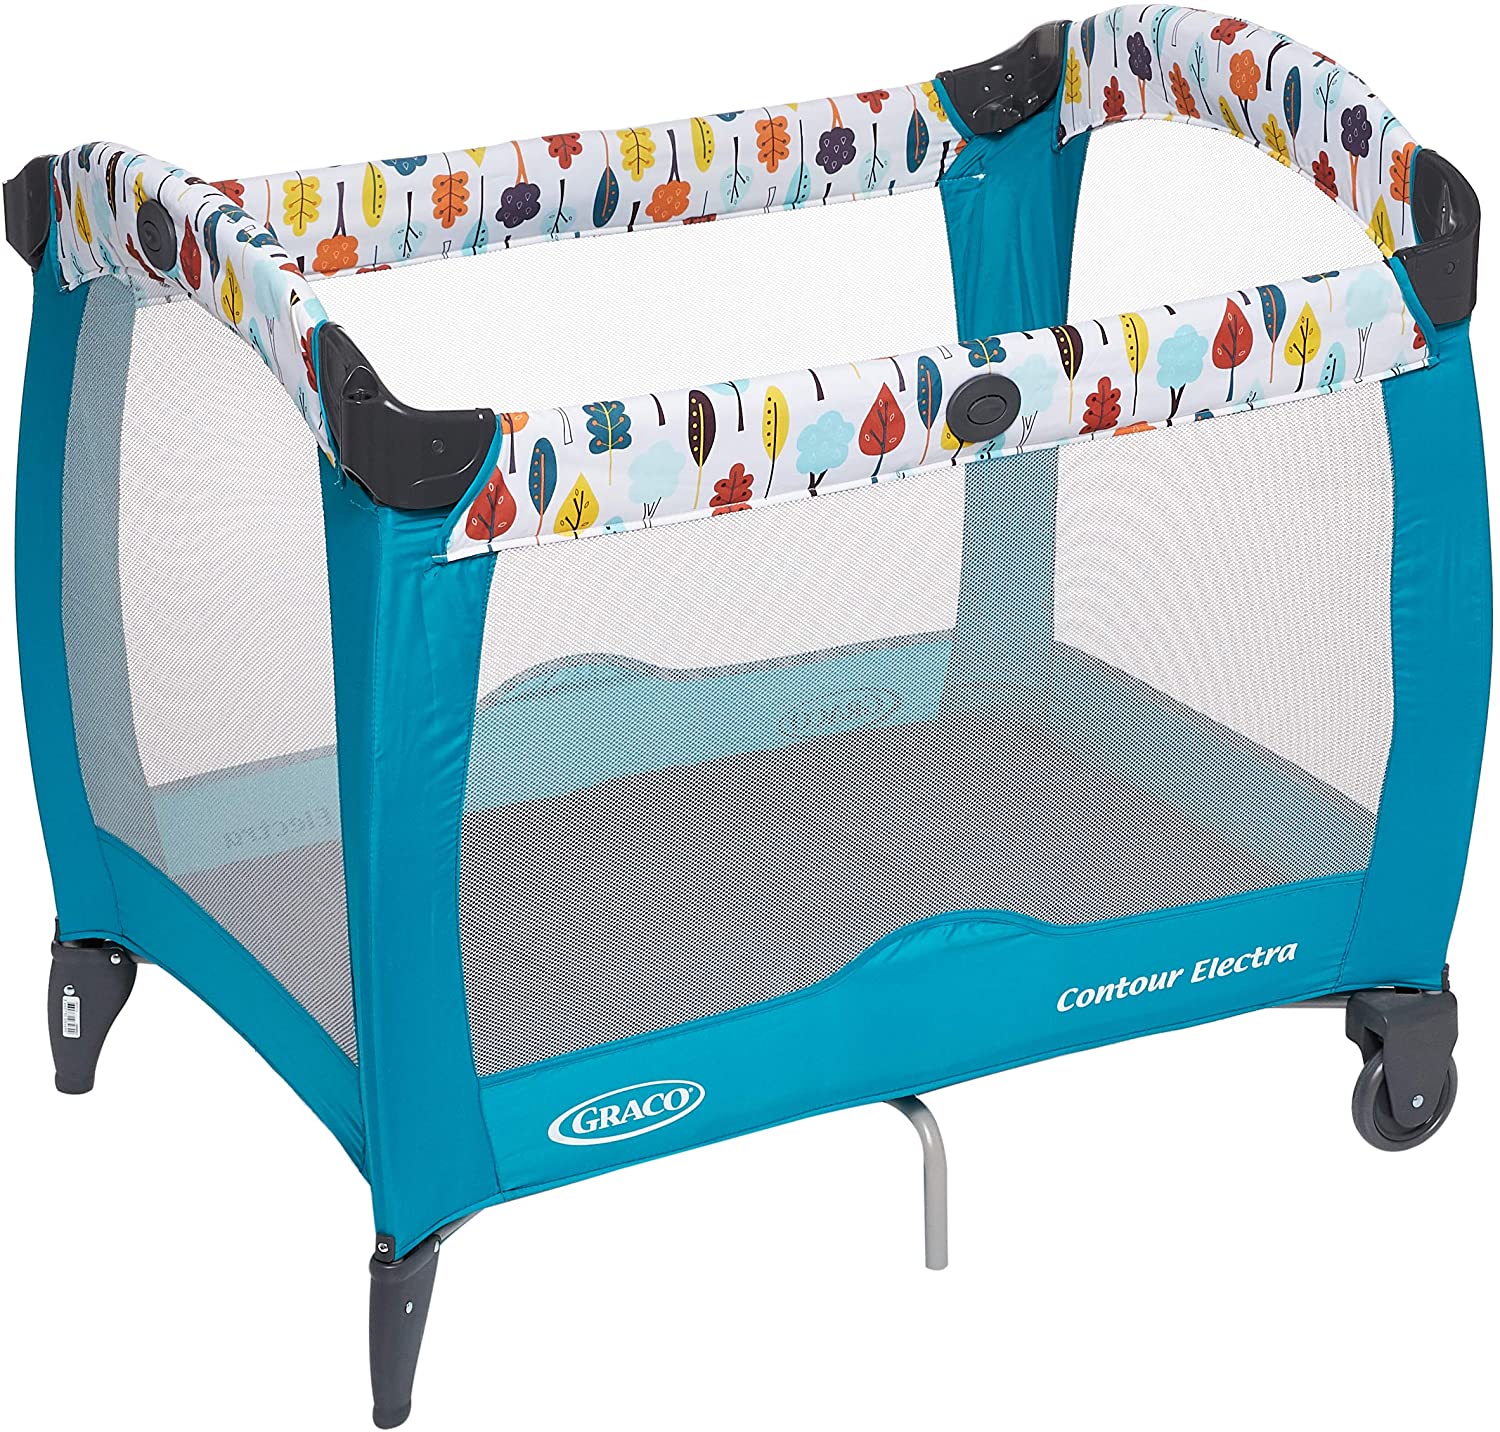 Baby Playpen Portable Bed - Graco